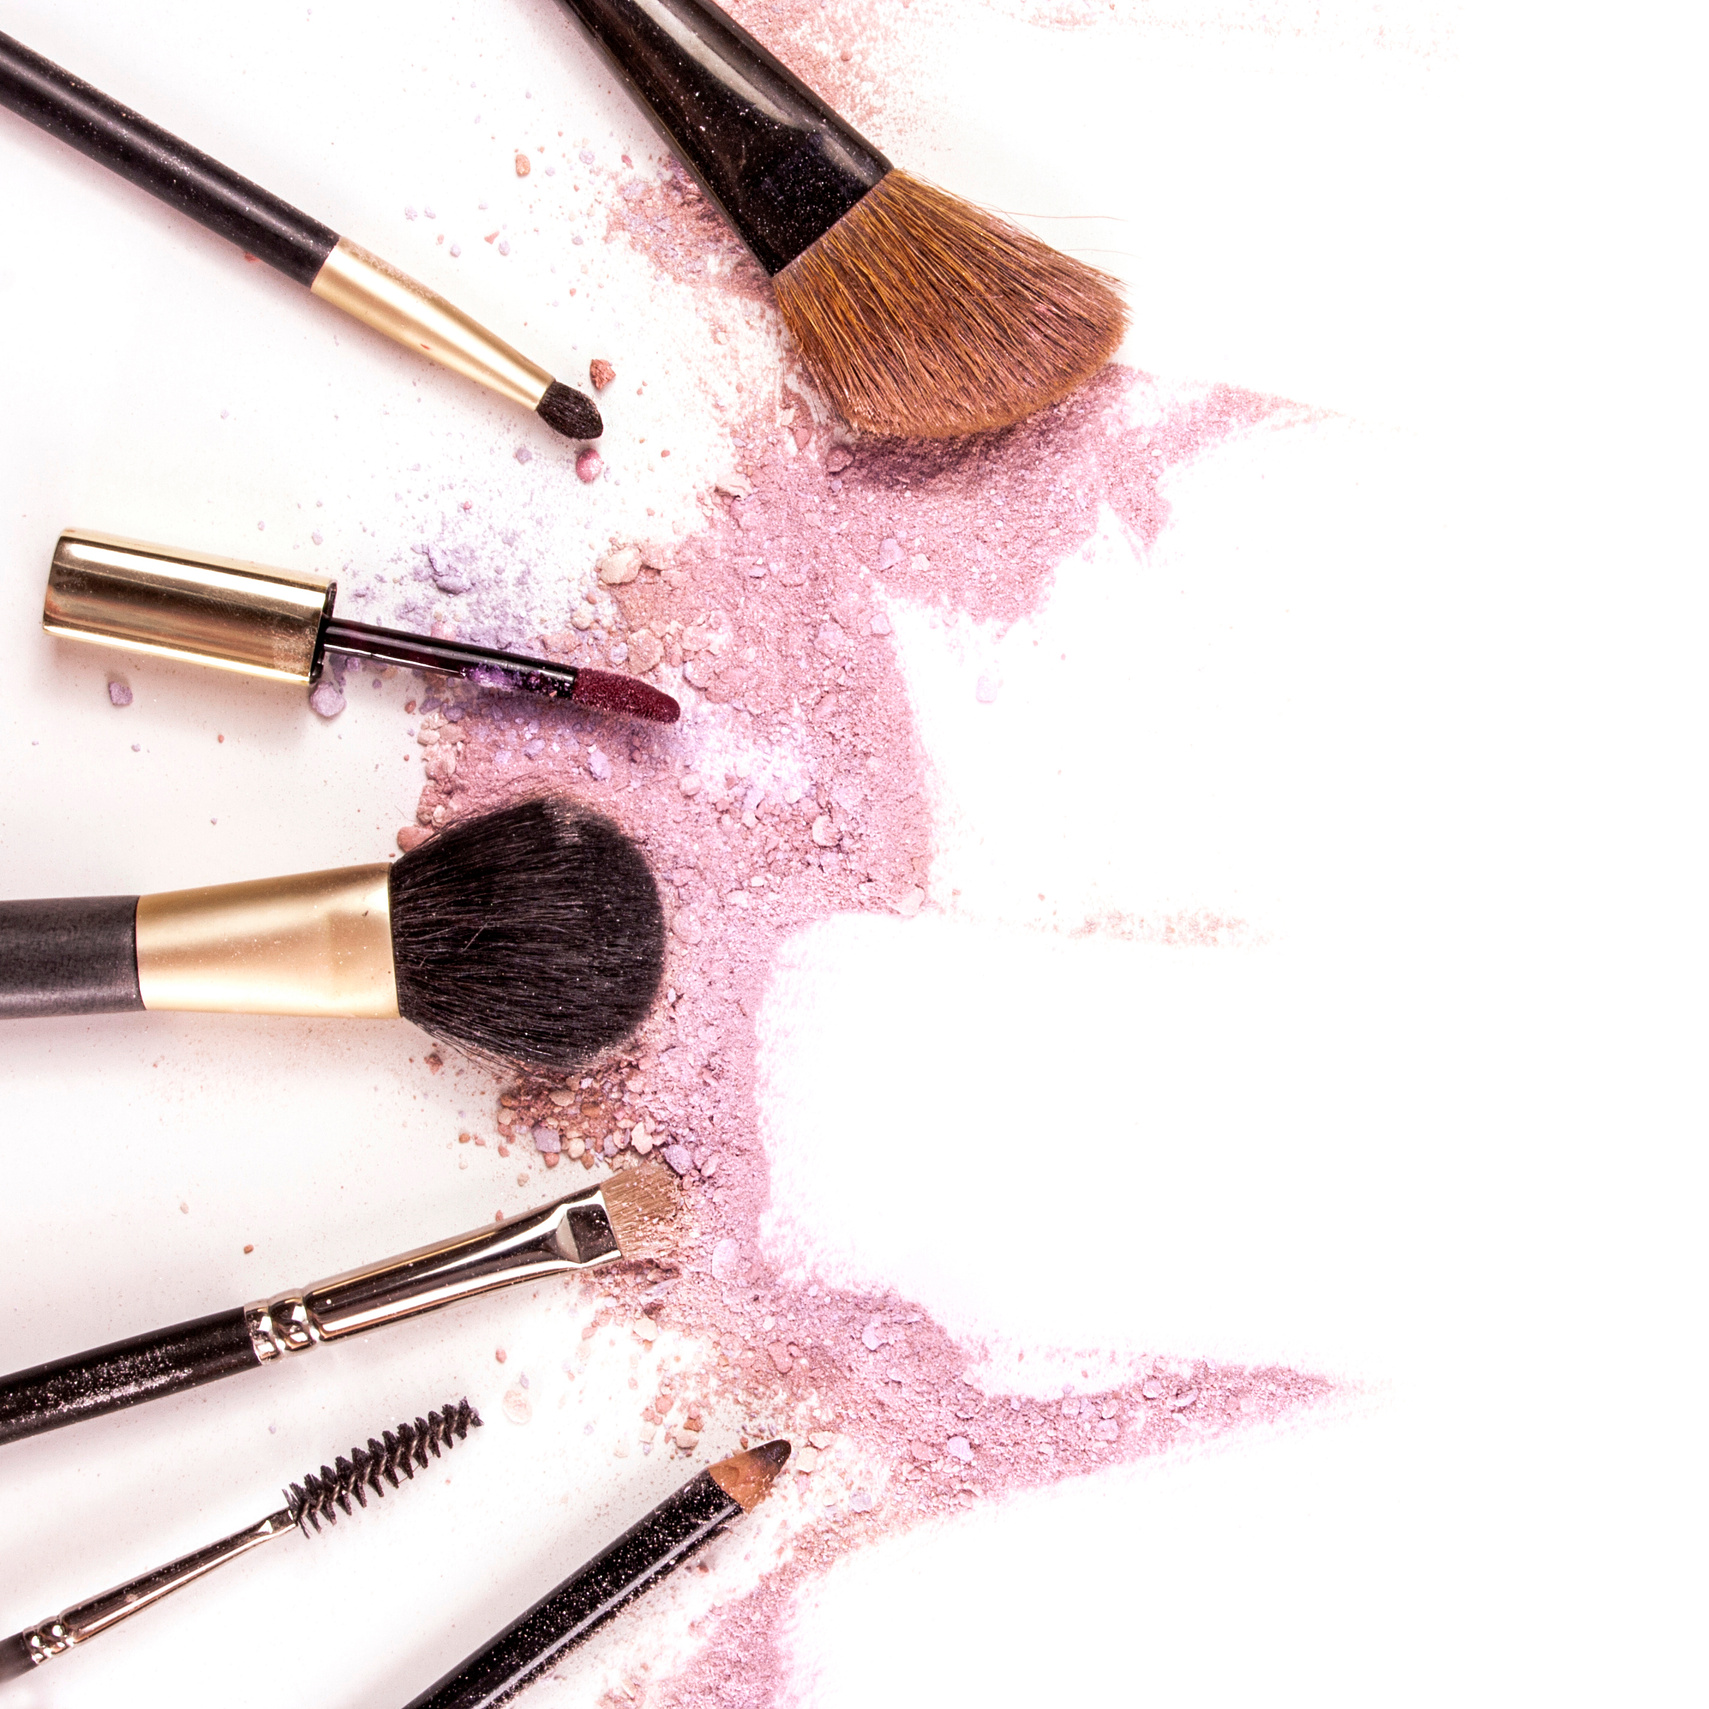 Makeup brushes, lip gloss and pencil on white background